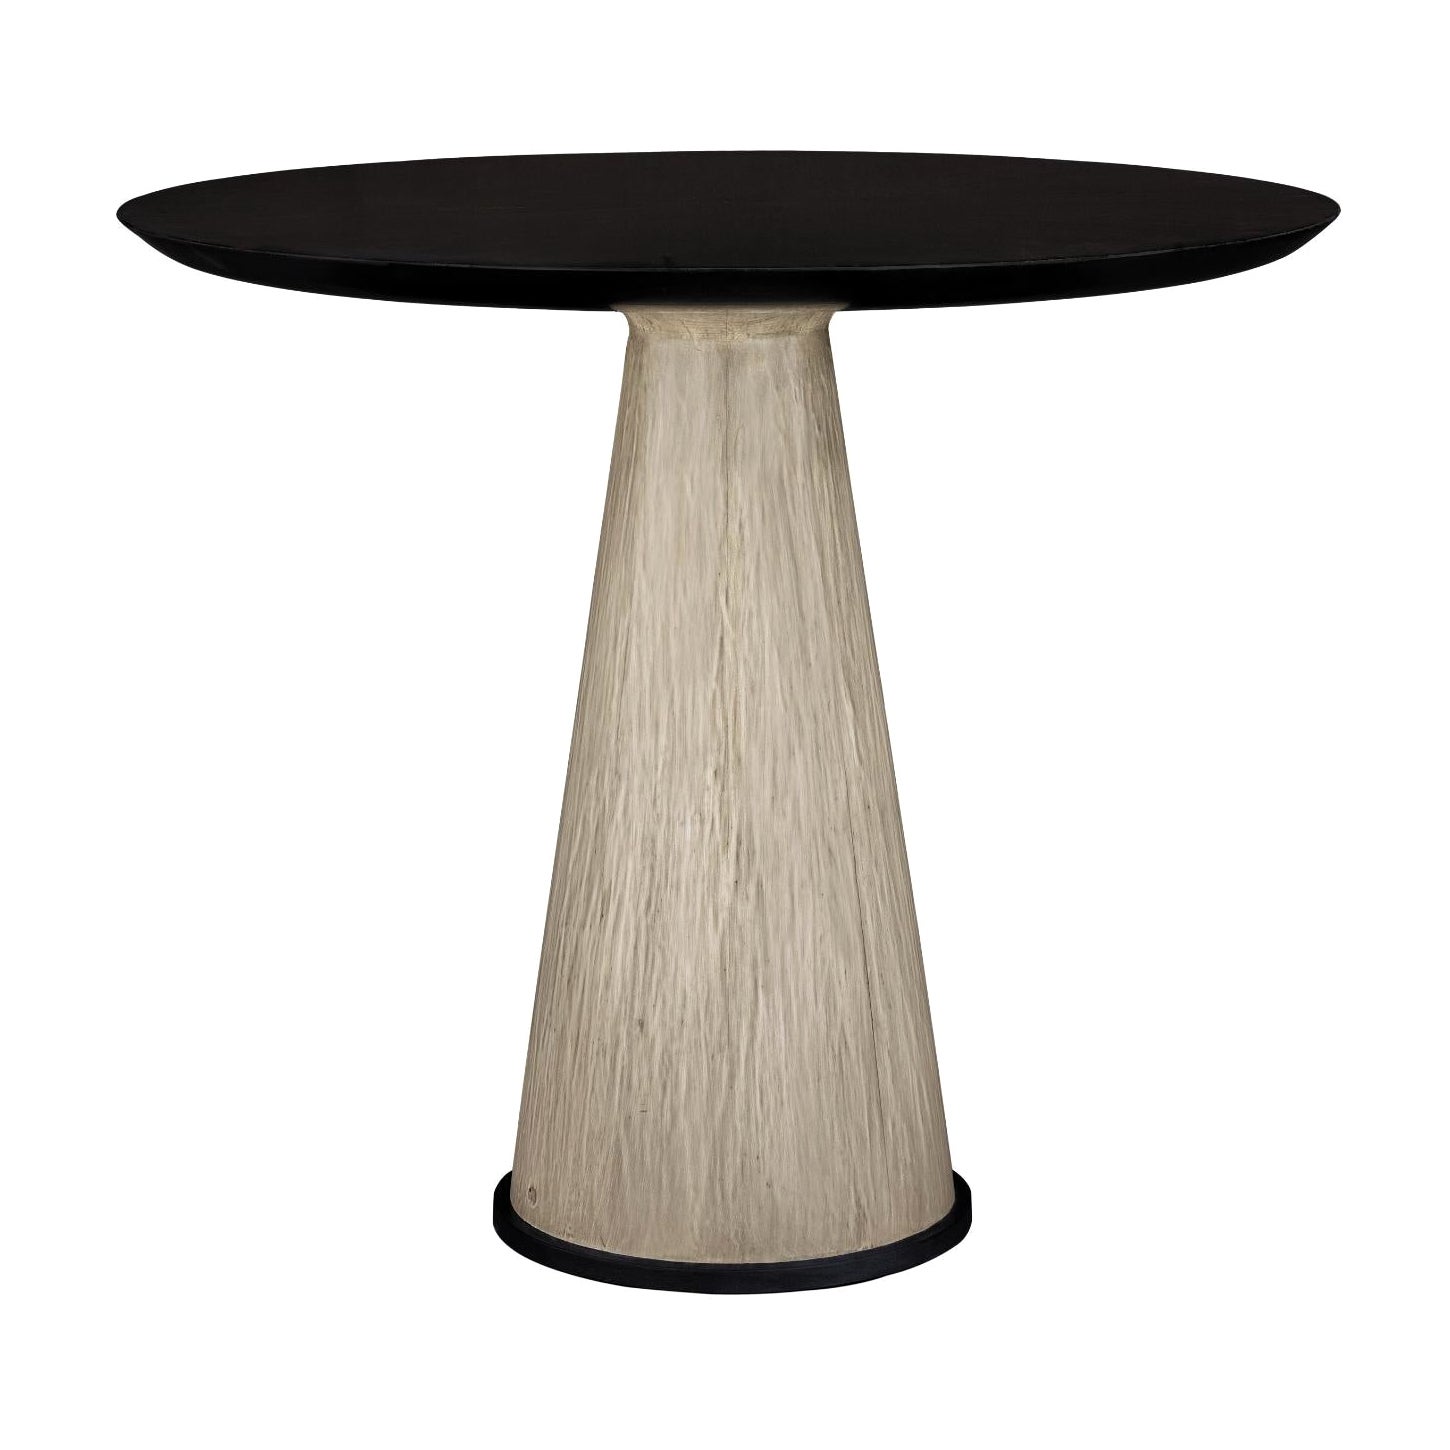 Wood Circular Occasional Dives Table with a Contrasting Conic Base For Sale